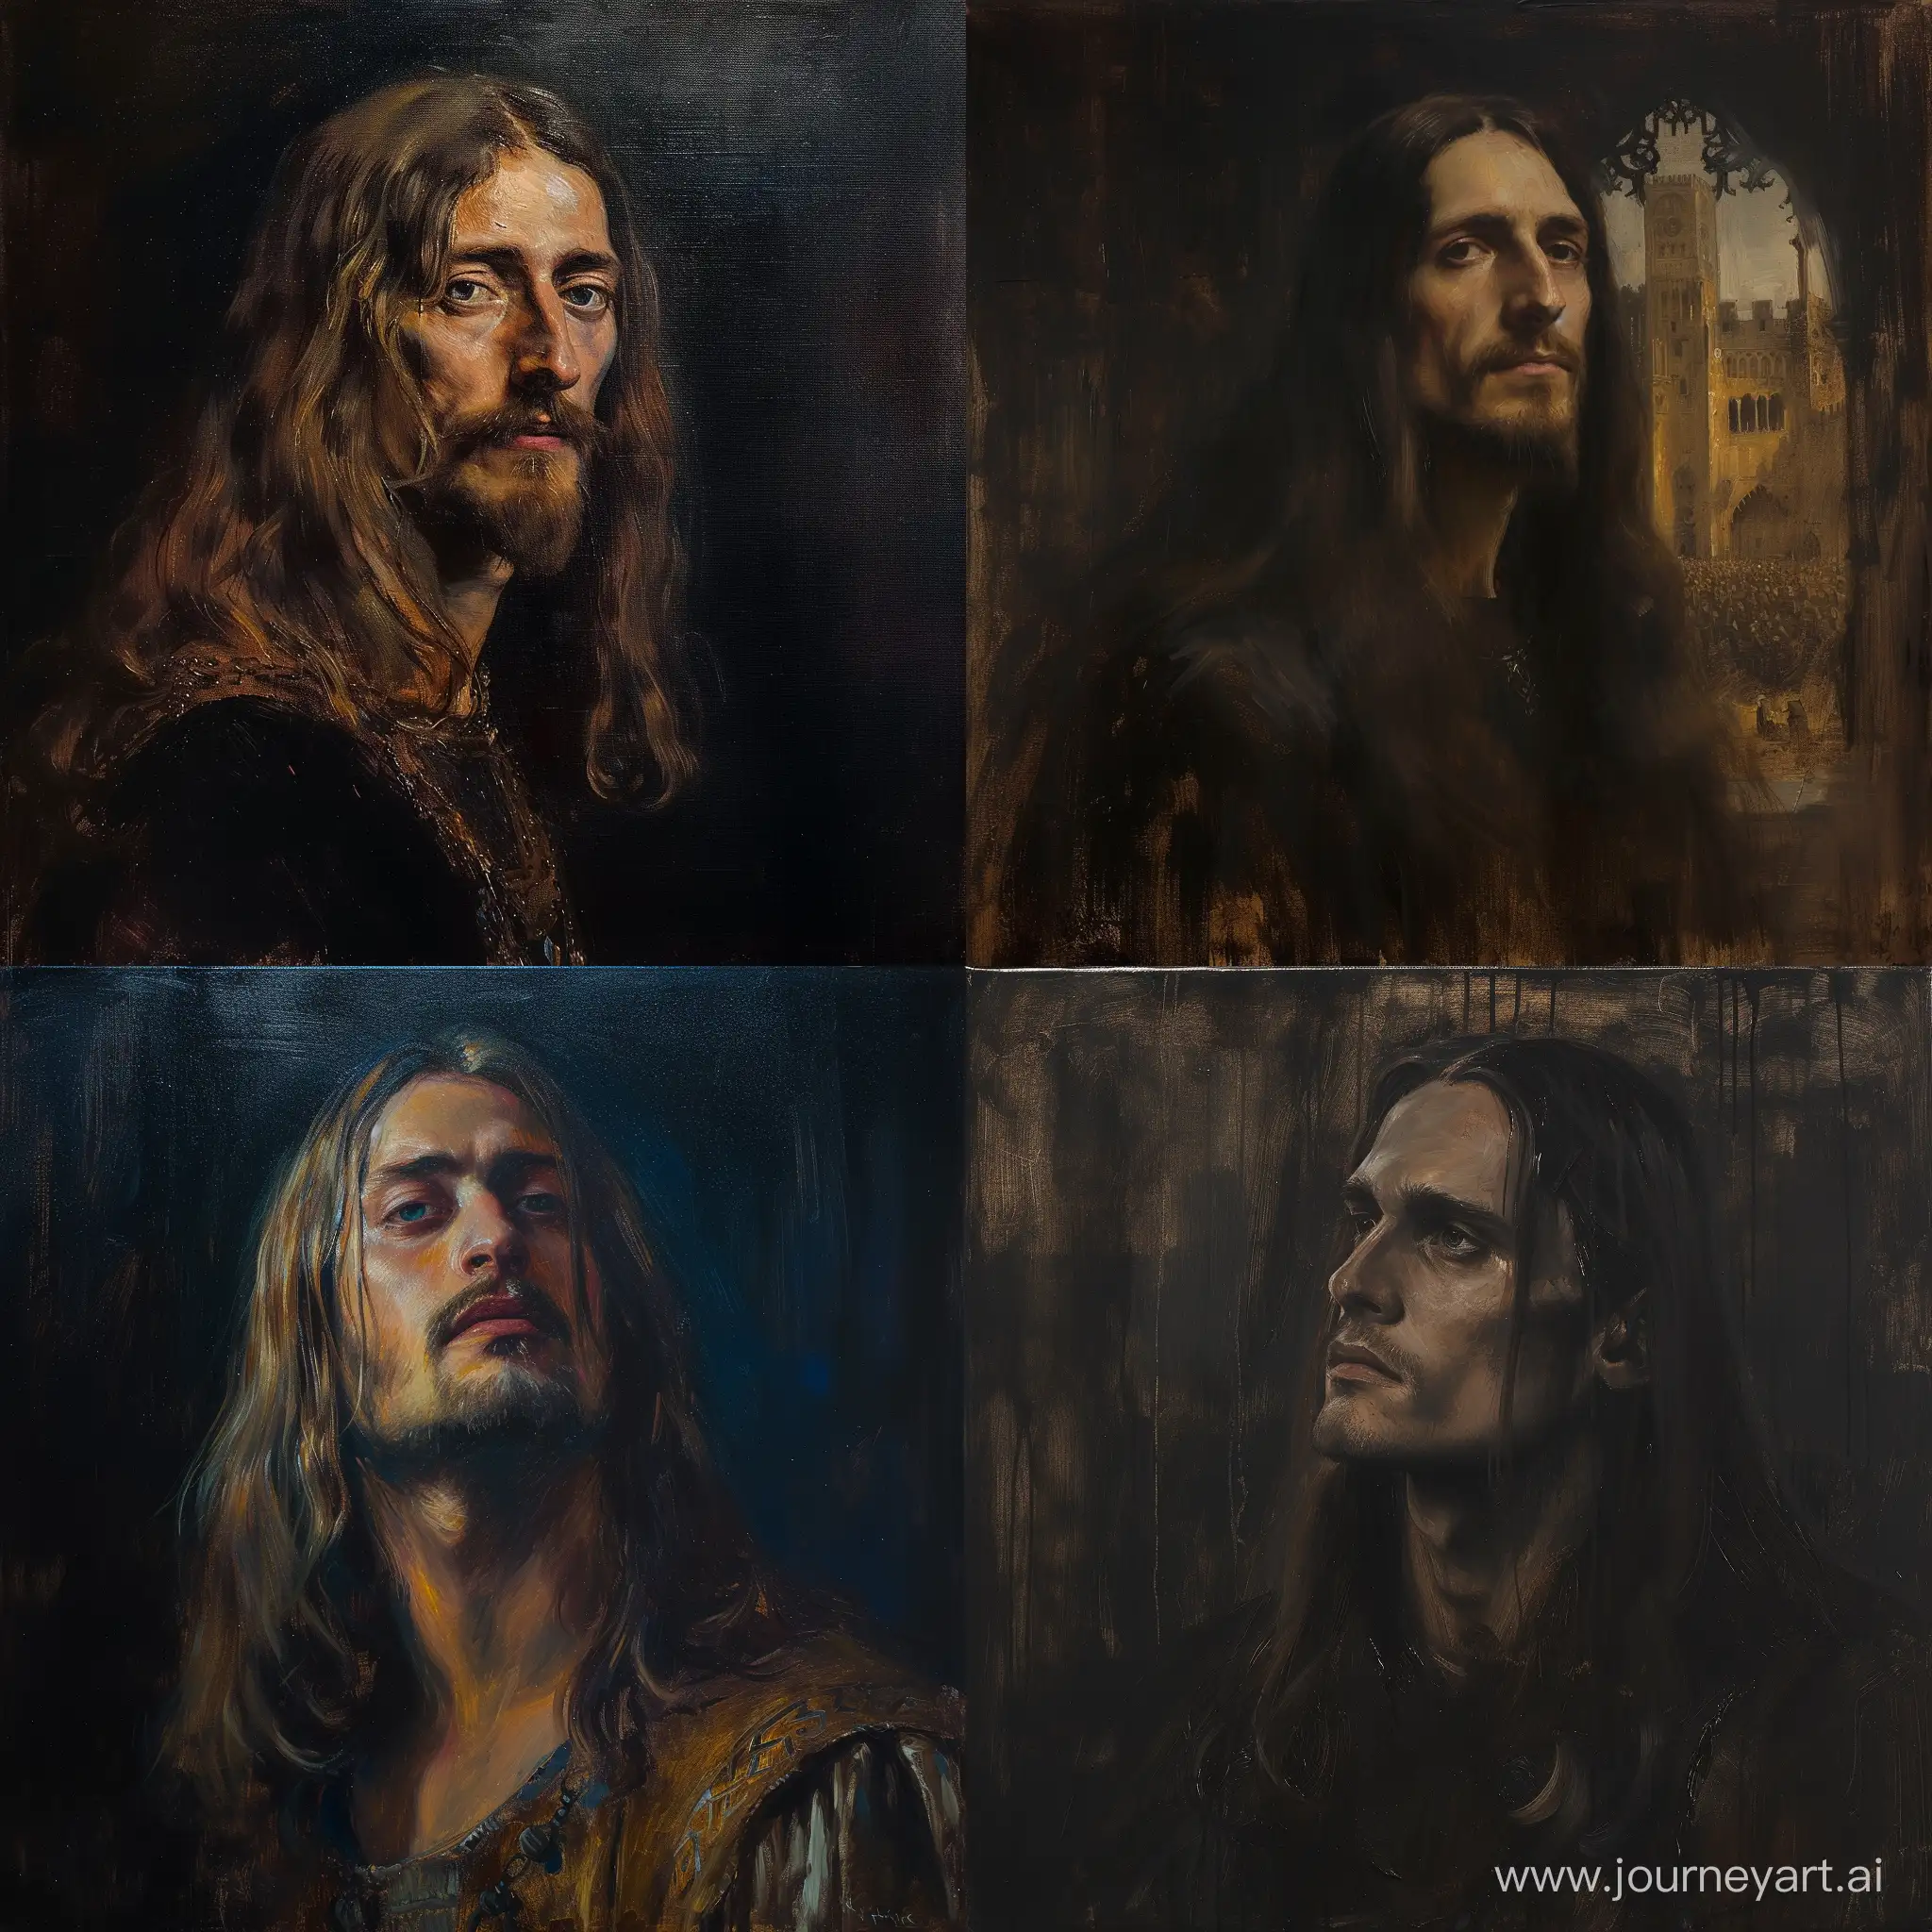 Dark oil painting of King Athelstan of England. He has long hair and slight beard. In palace. Dark color brush strikes oil painting.